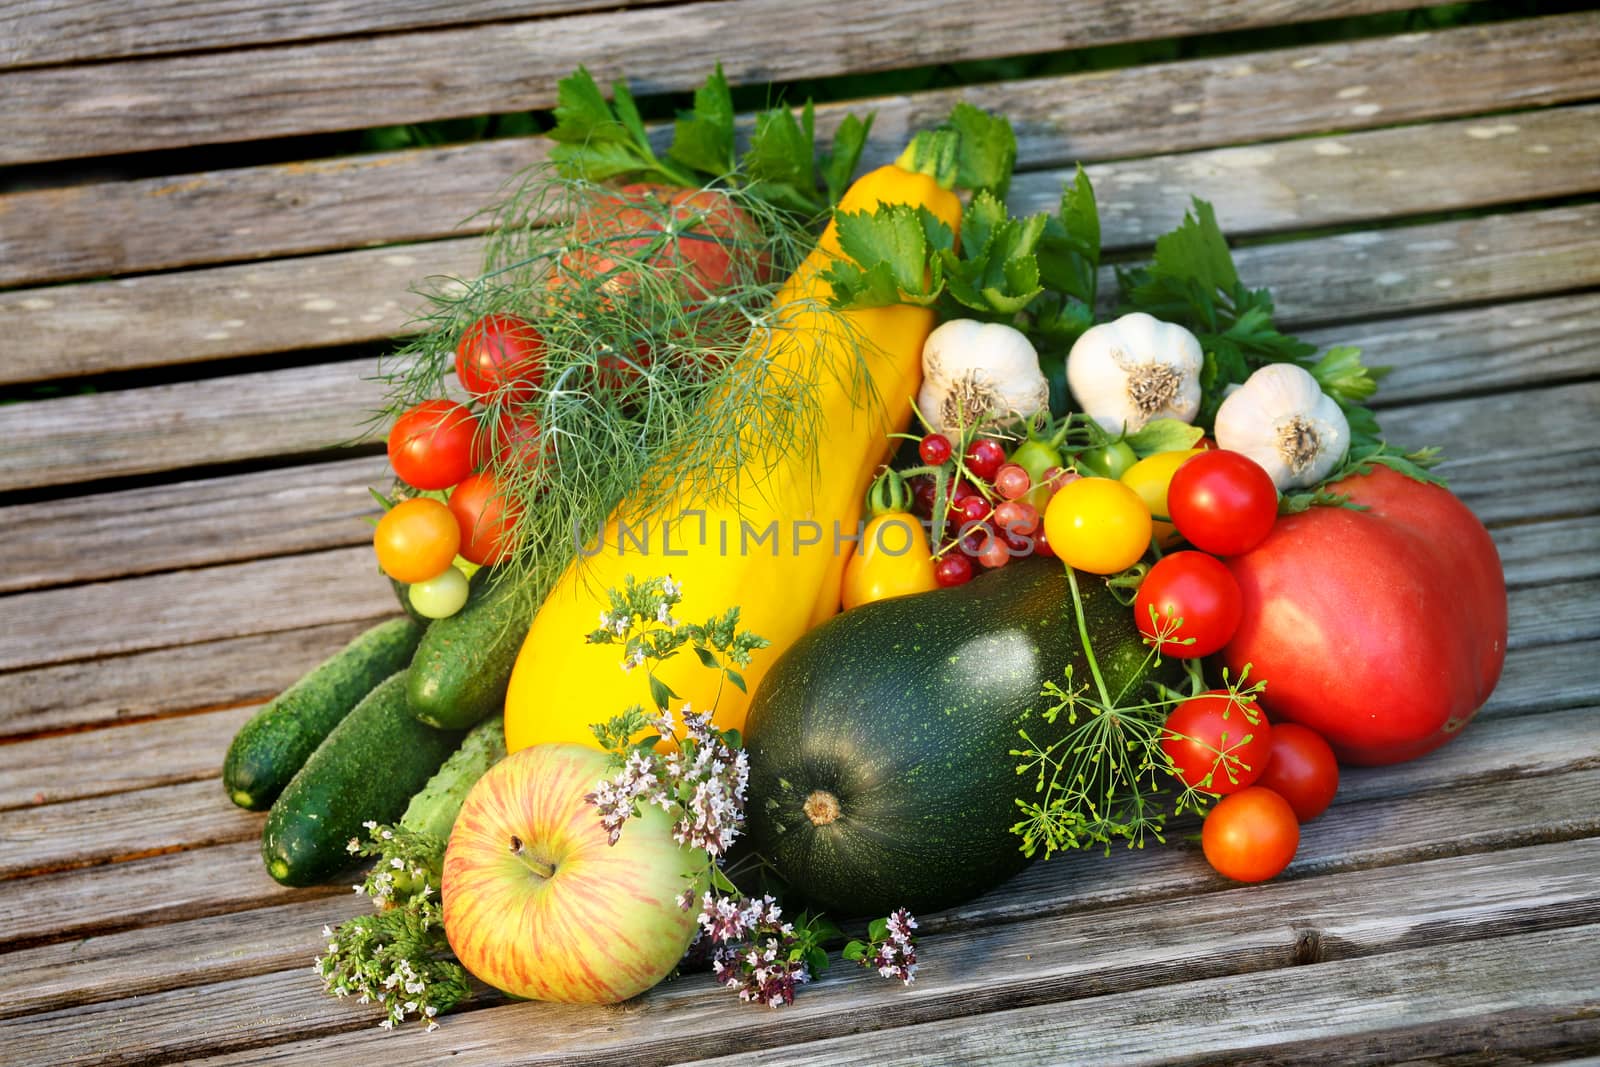 Ripe vegetables and fruit on wooden bench in garden